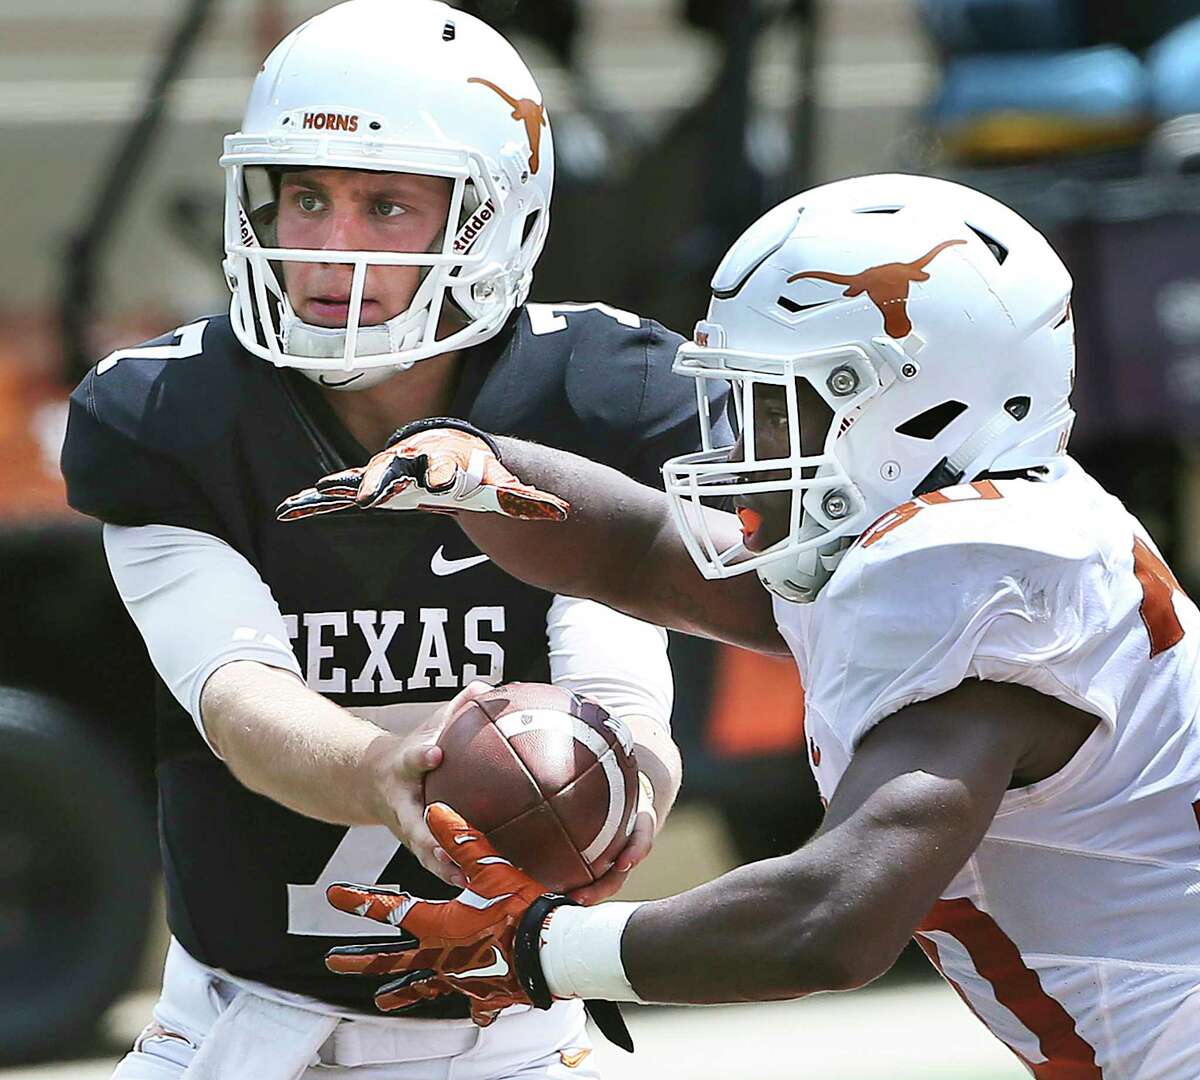 Quarterback Shane Buechele hands off to running back Toneil Carter as the Texas Longhorns play their Orange-White spring game on April 15, 2017.